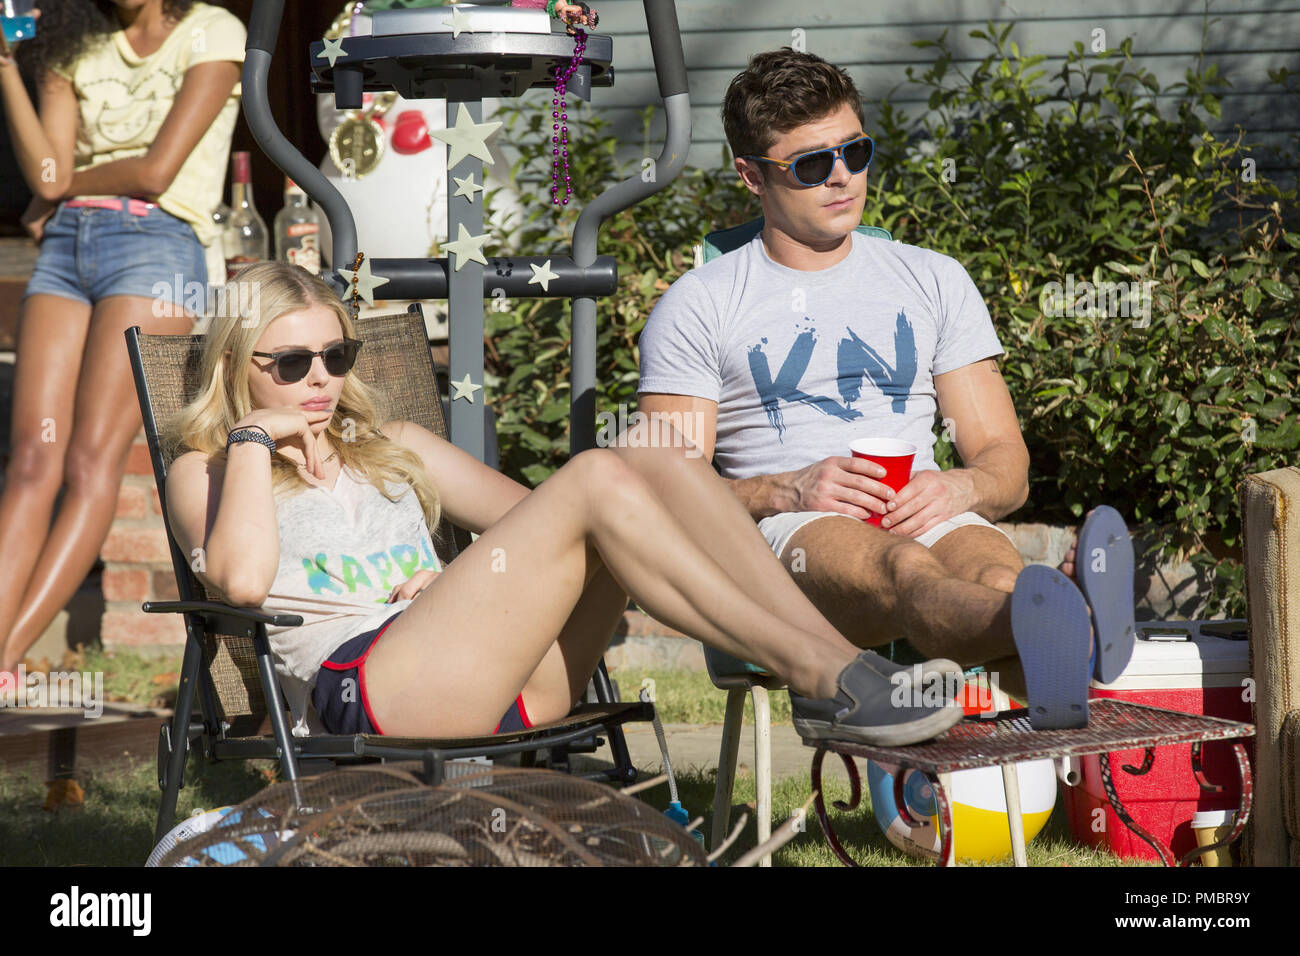 Shelby (CHLOË GRACE MORETZ) has made Teddy (ZAC EFRON) an honorary member of Kappa Nu in 'Neighbors 2: Sorority Rising,' the follow-up to 2014's most popular original comedy. Stock Photo